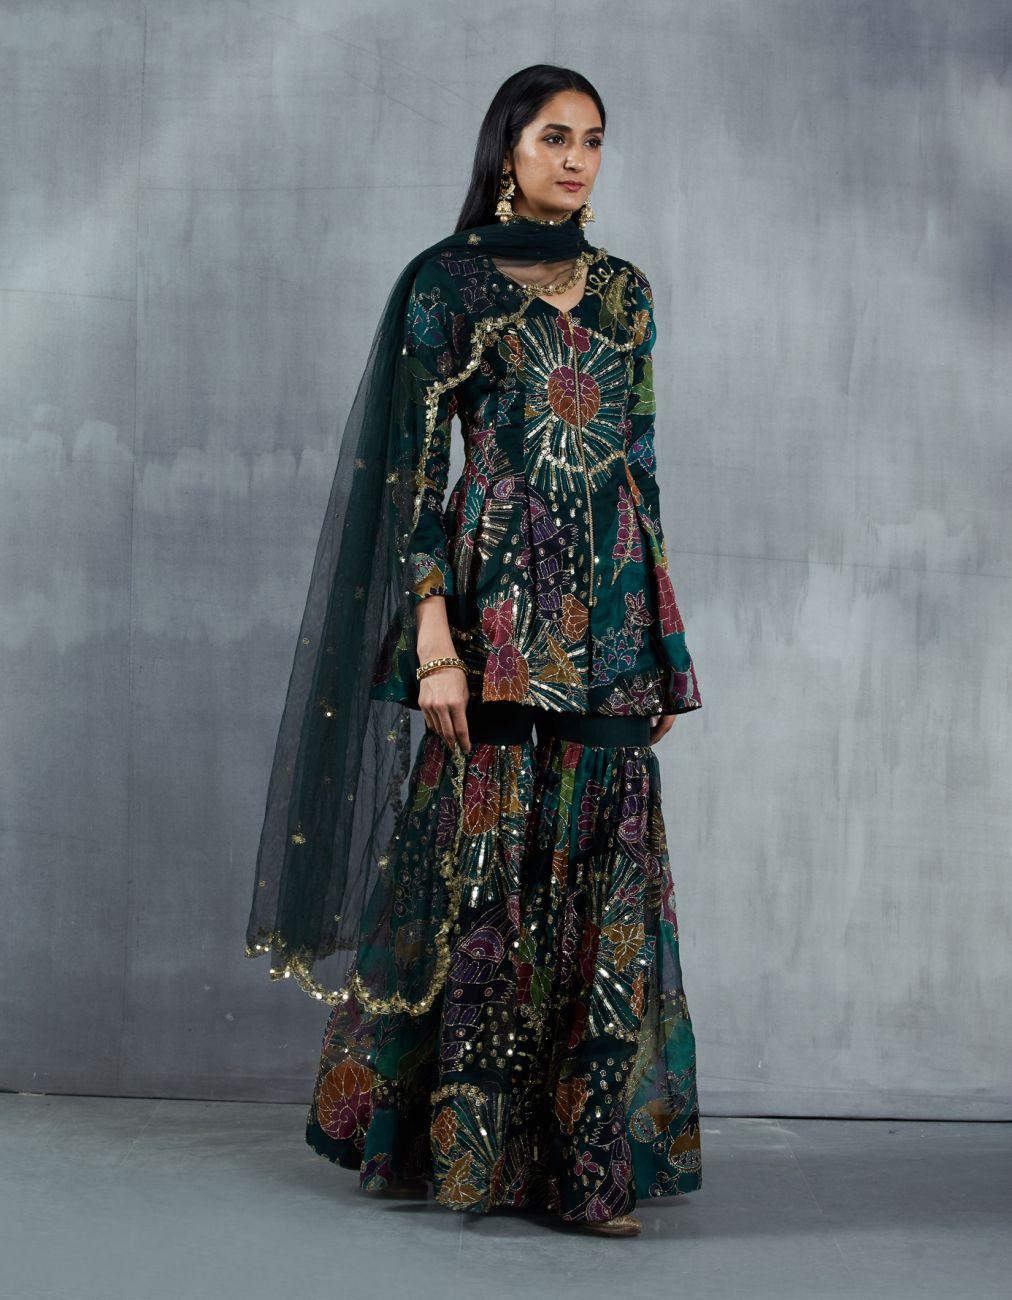 New) Latest Sharara Suit With Short Kurti For Wedding 2022